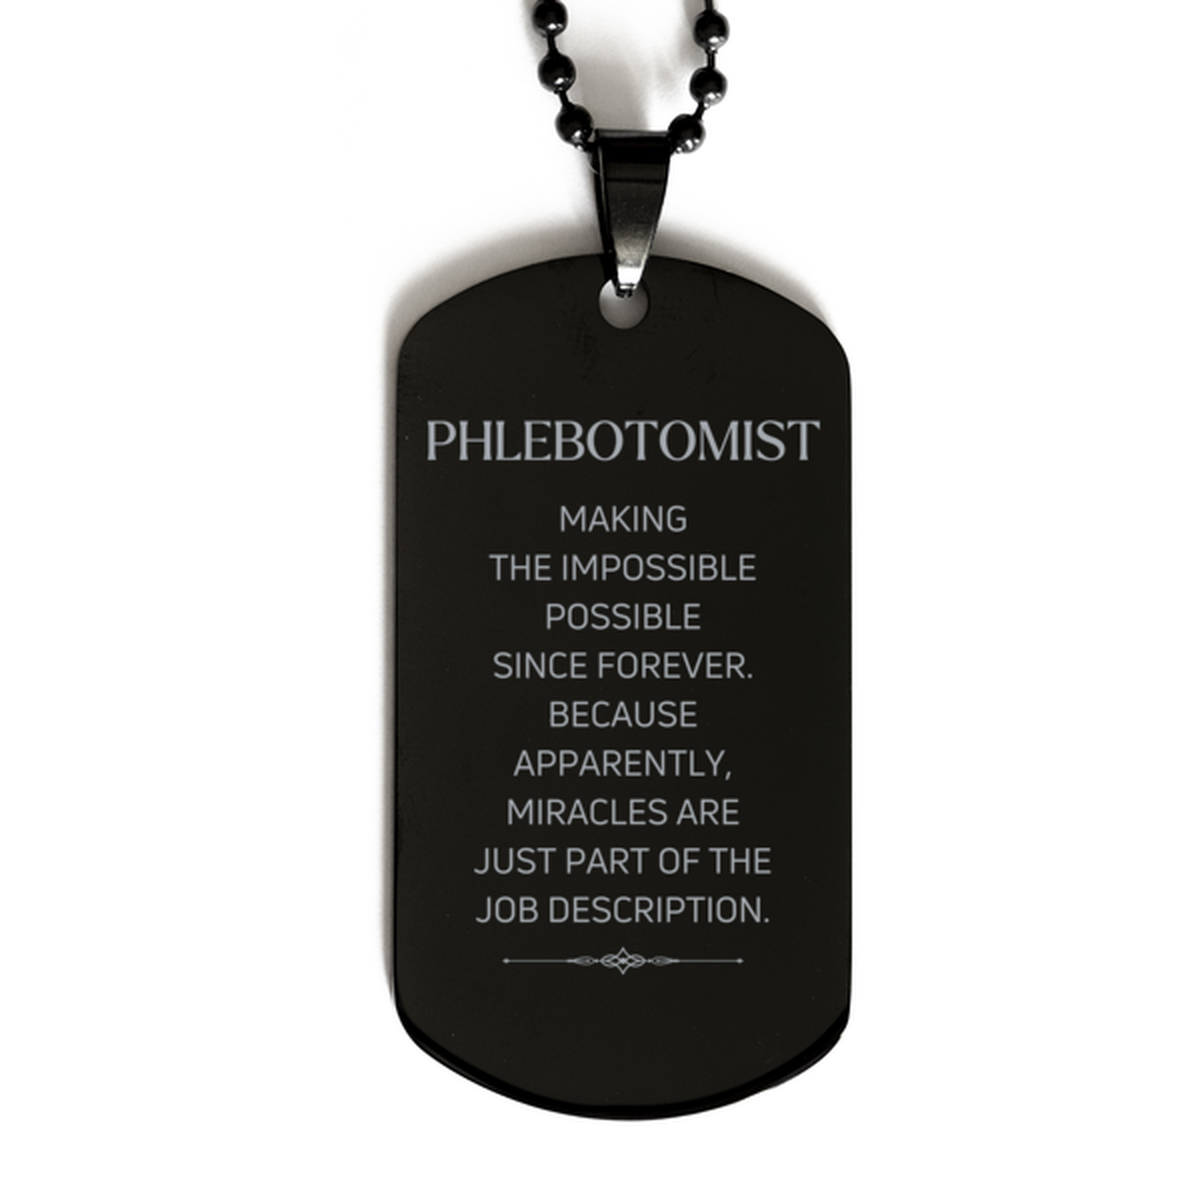 Funny Phlebotomist Gifts, Miracles are just part of the job description, Inspirational Birthday Black Dog Tag For Phlebotomist, Men, Women, Coworkers, Friends, Boss